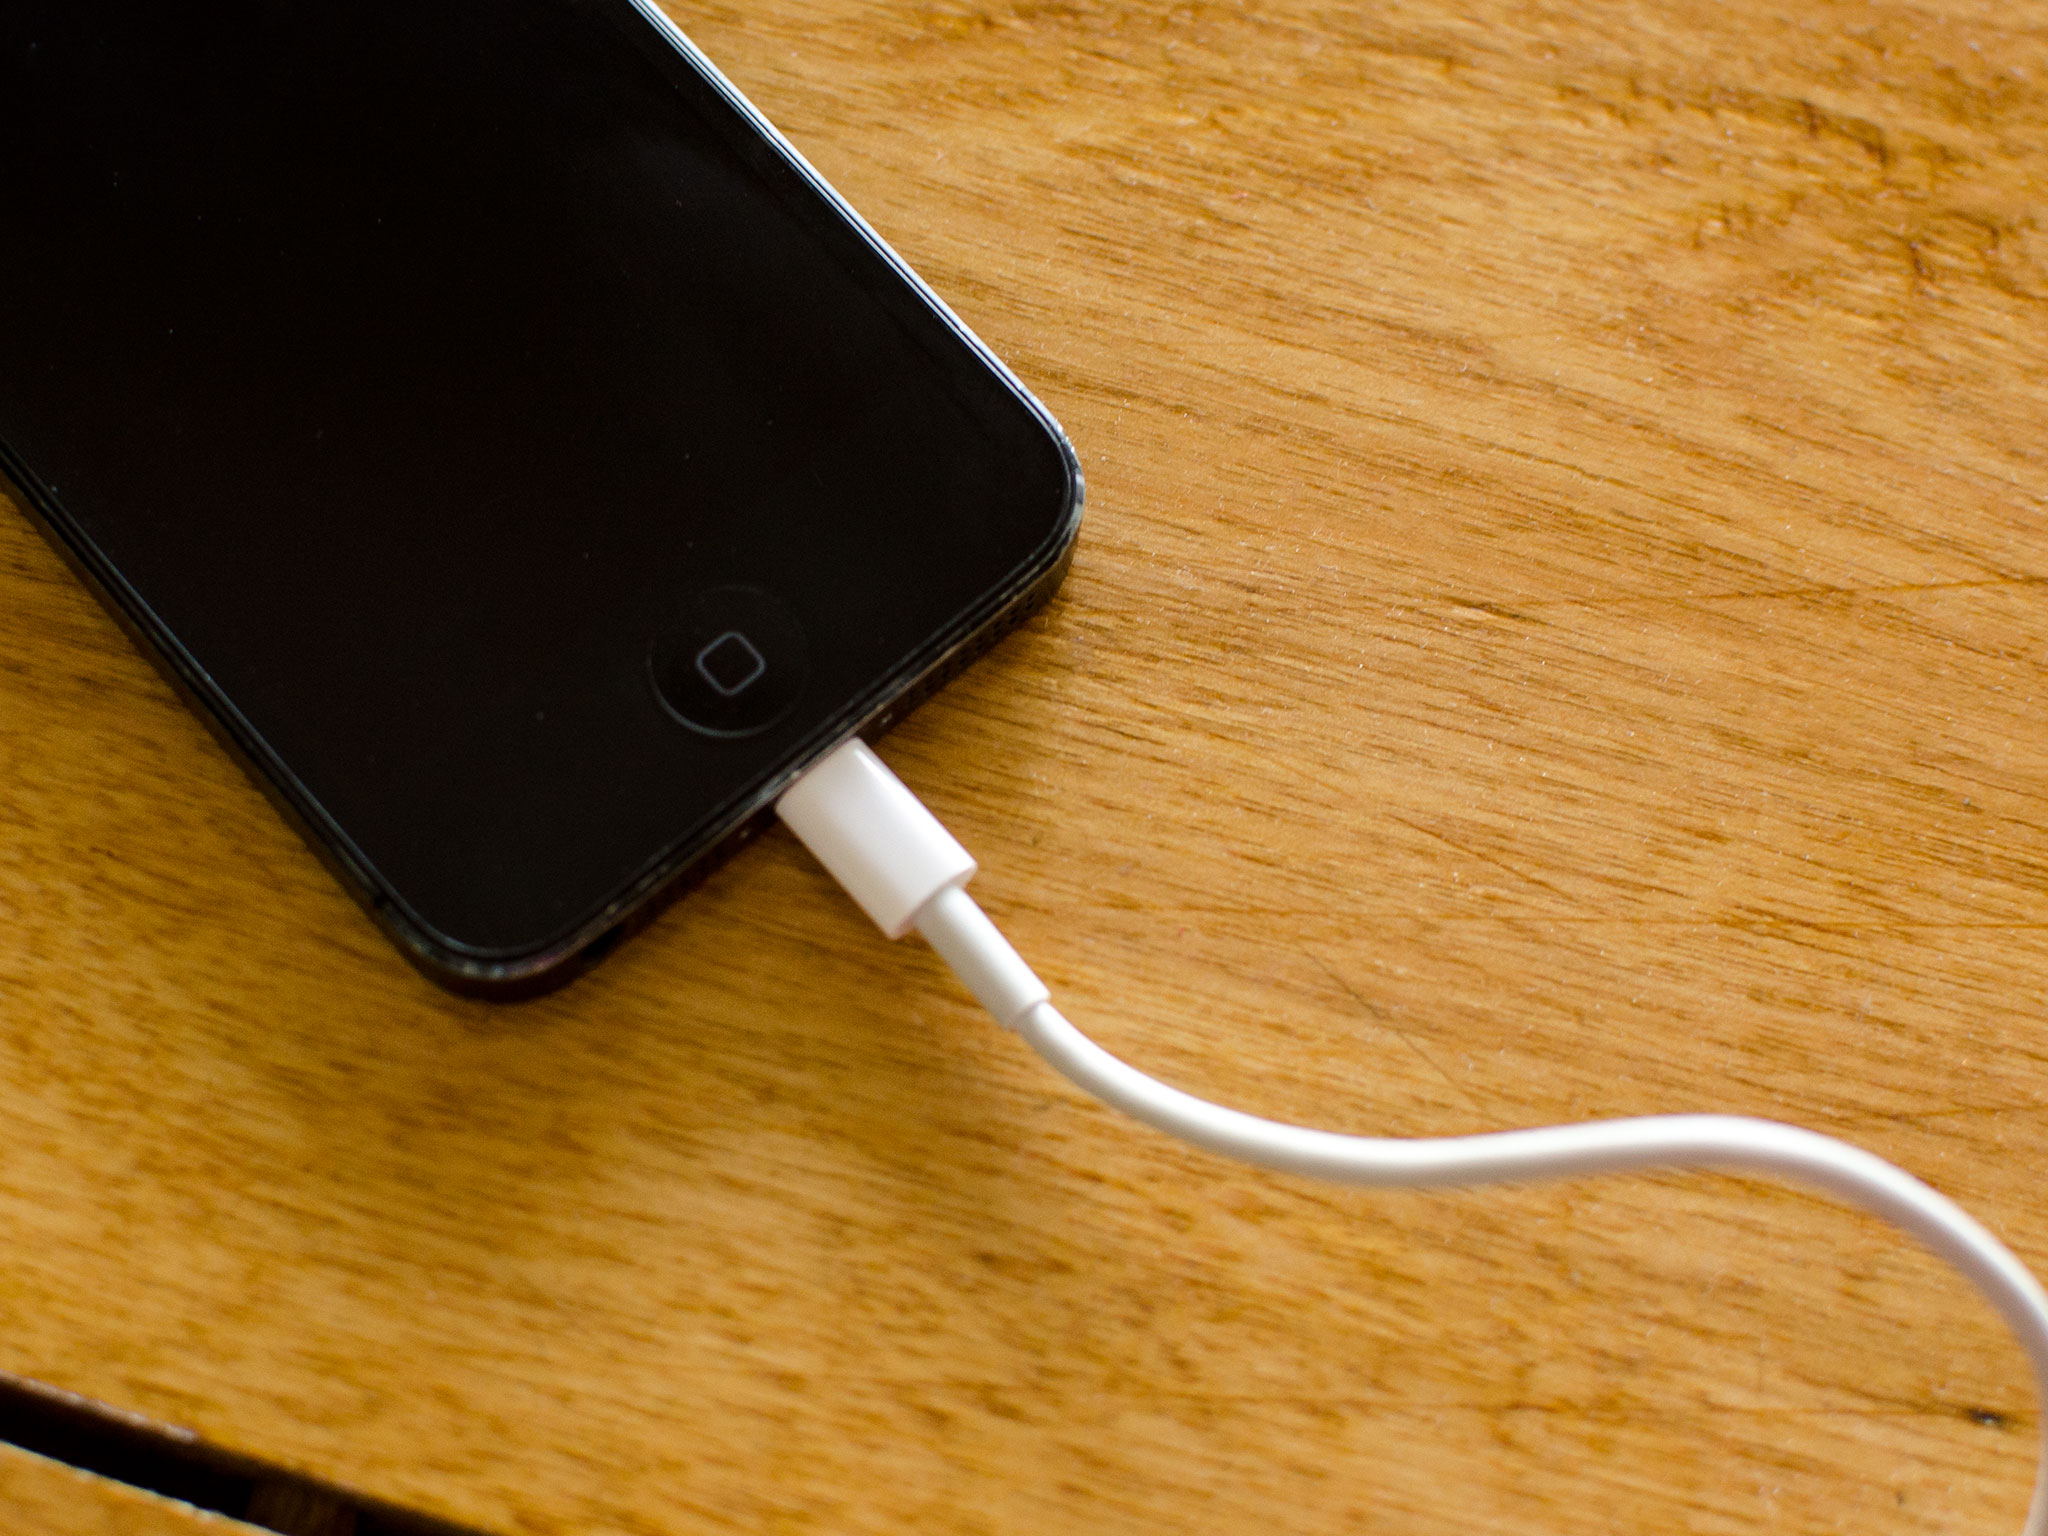 How to fix a broken charge port on an iPhone 5 | iMore